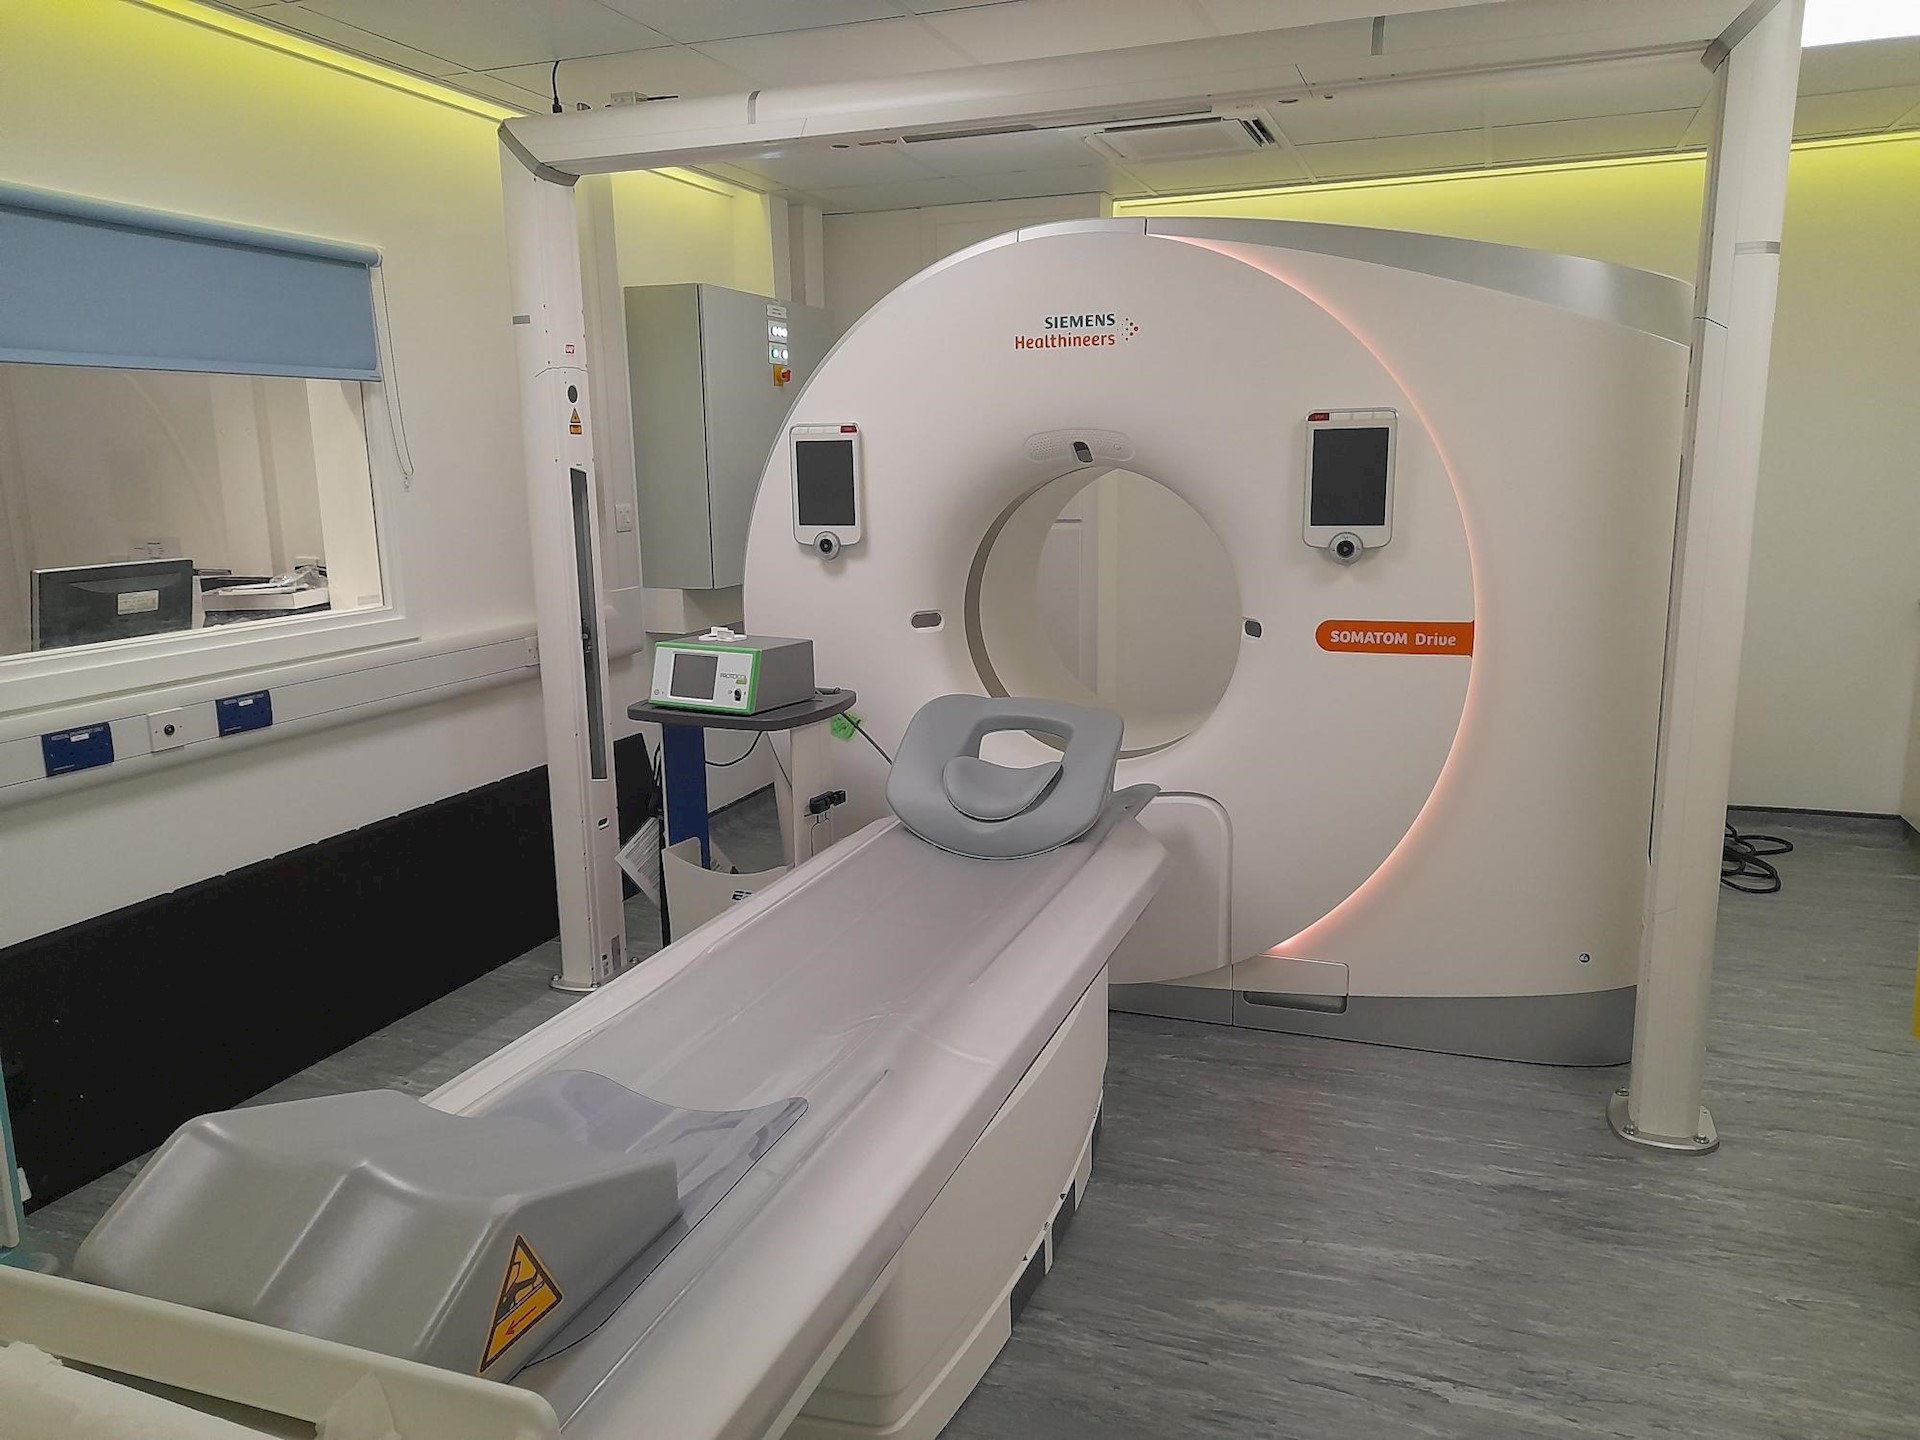 Spire invests £1.5 million in new CT scanner for Spire Southampton Hospital, bringing faster diagnoses for cancer patients